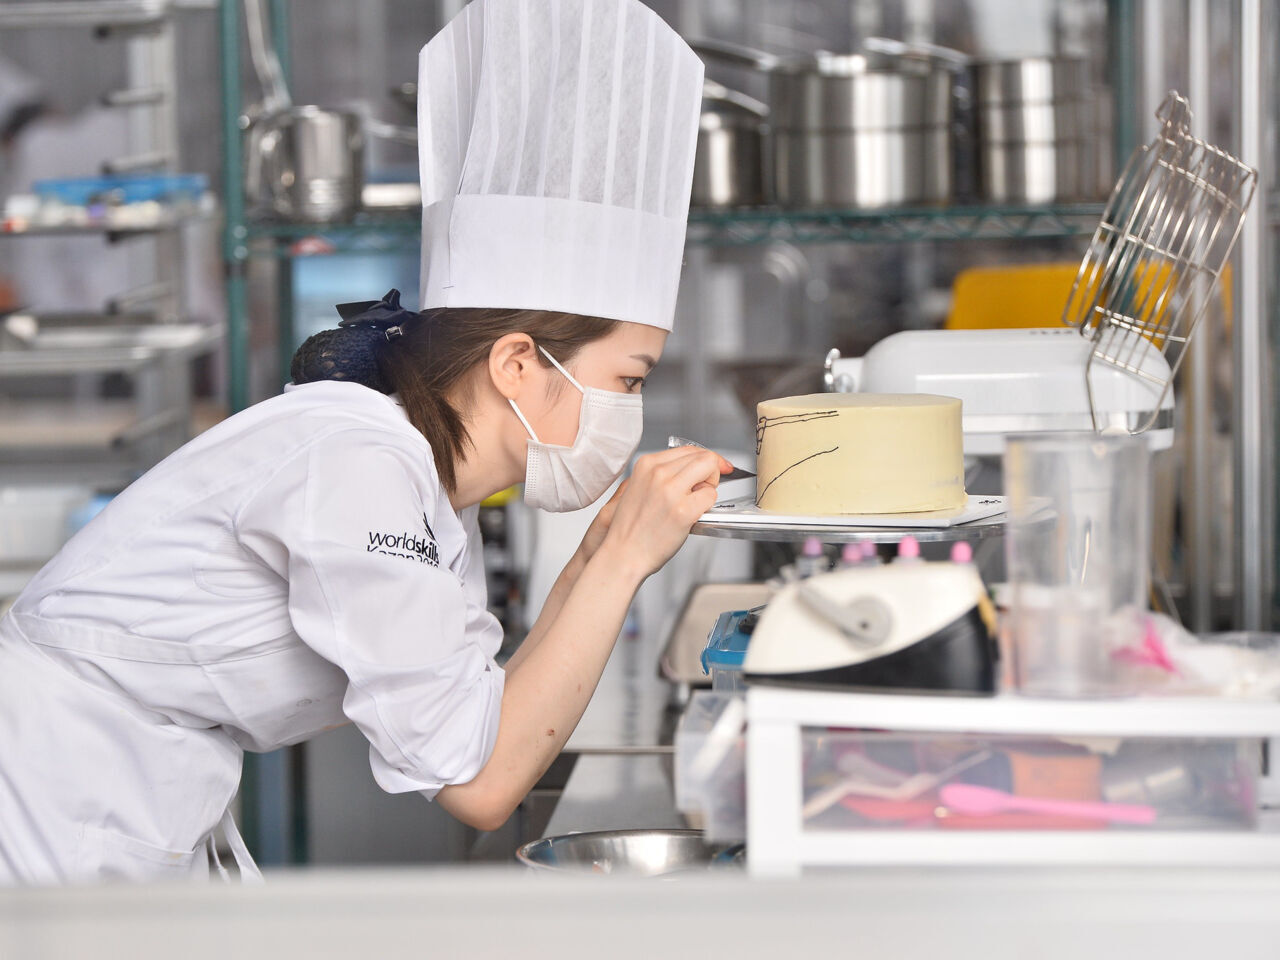 Food and hospitality skill competitions showcase the sector’s infinite potential